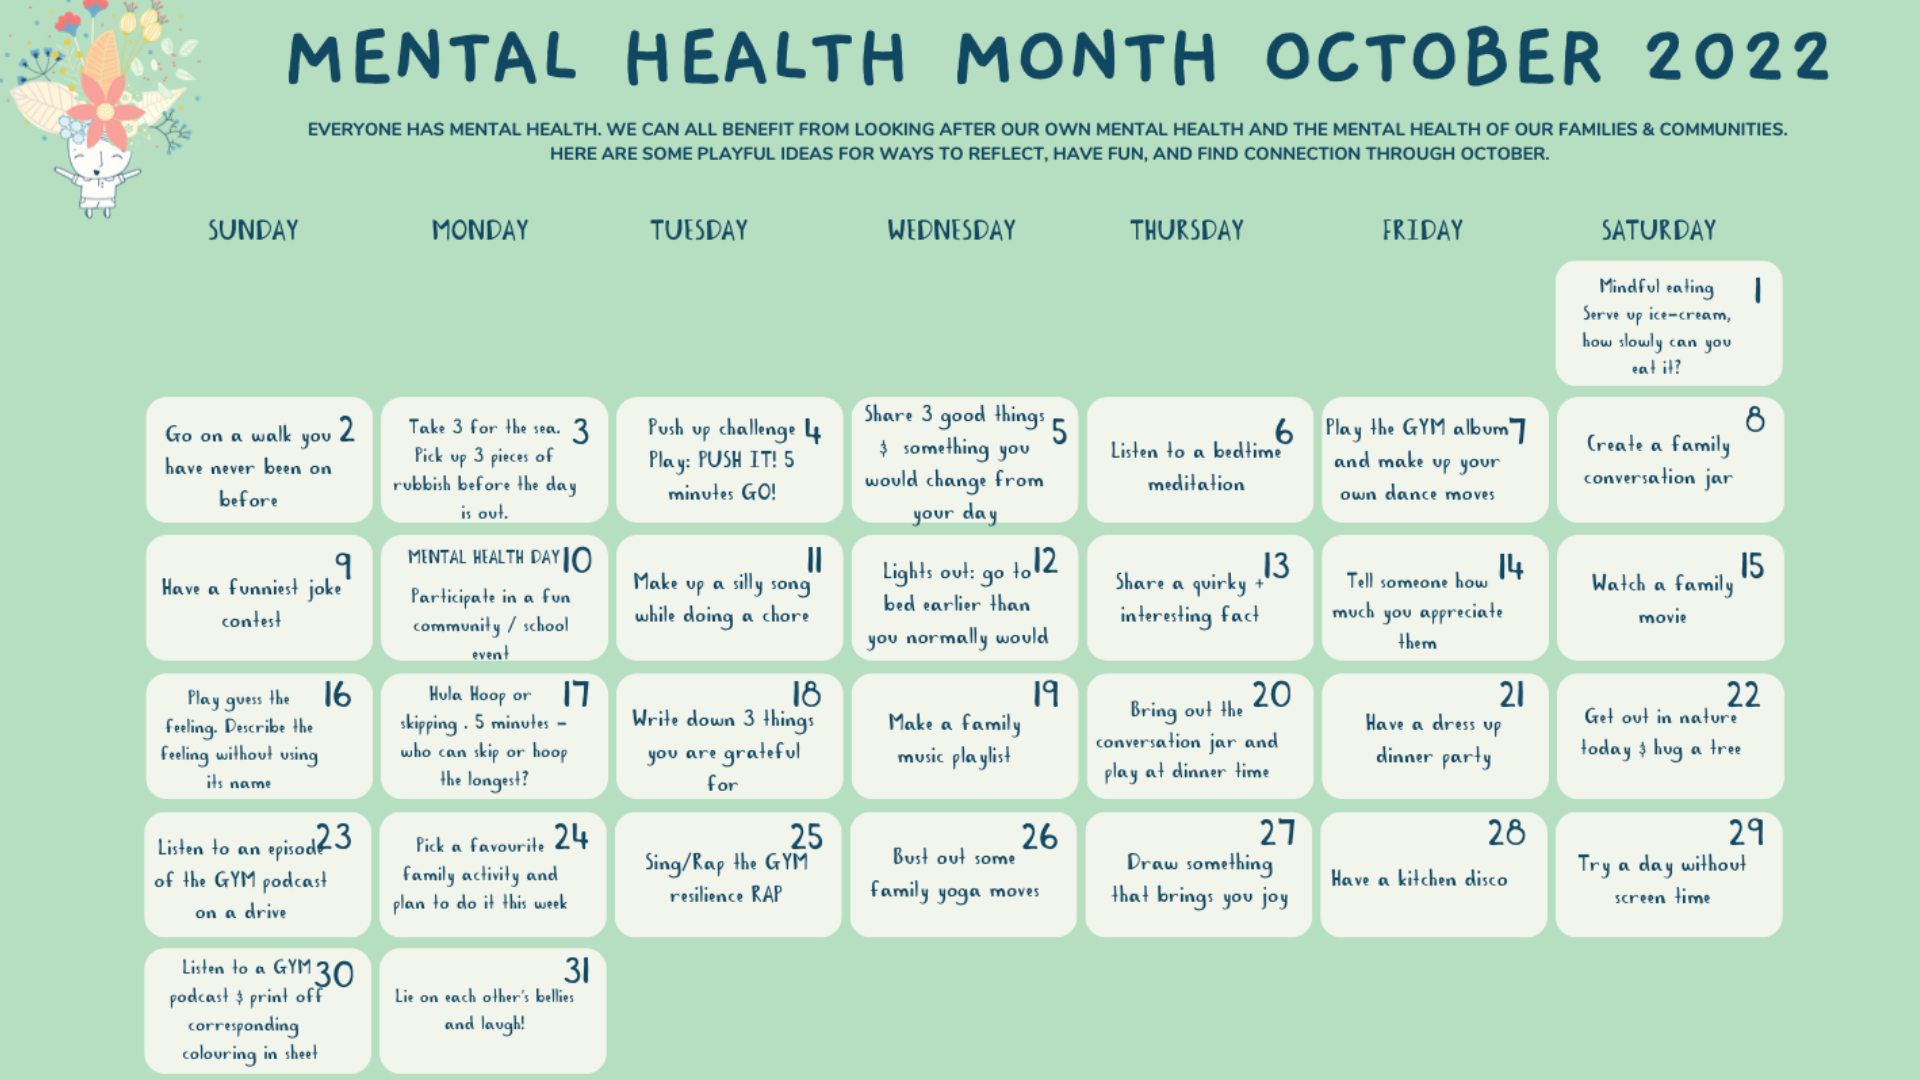 Great ideas for Mental Health Month